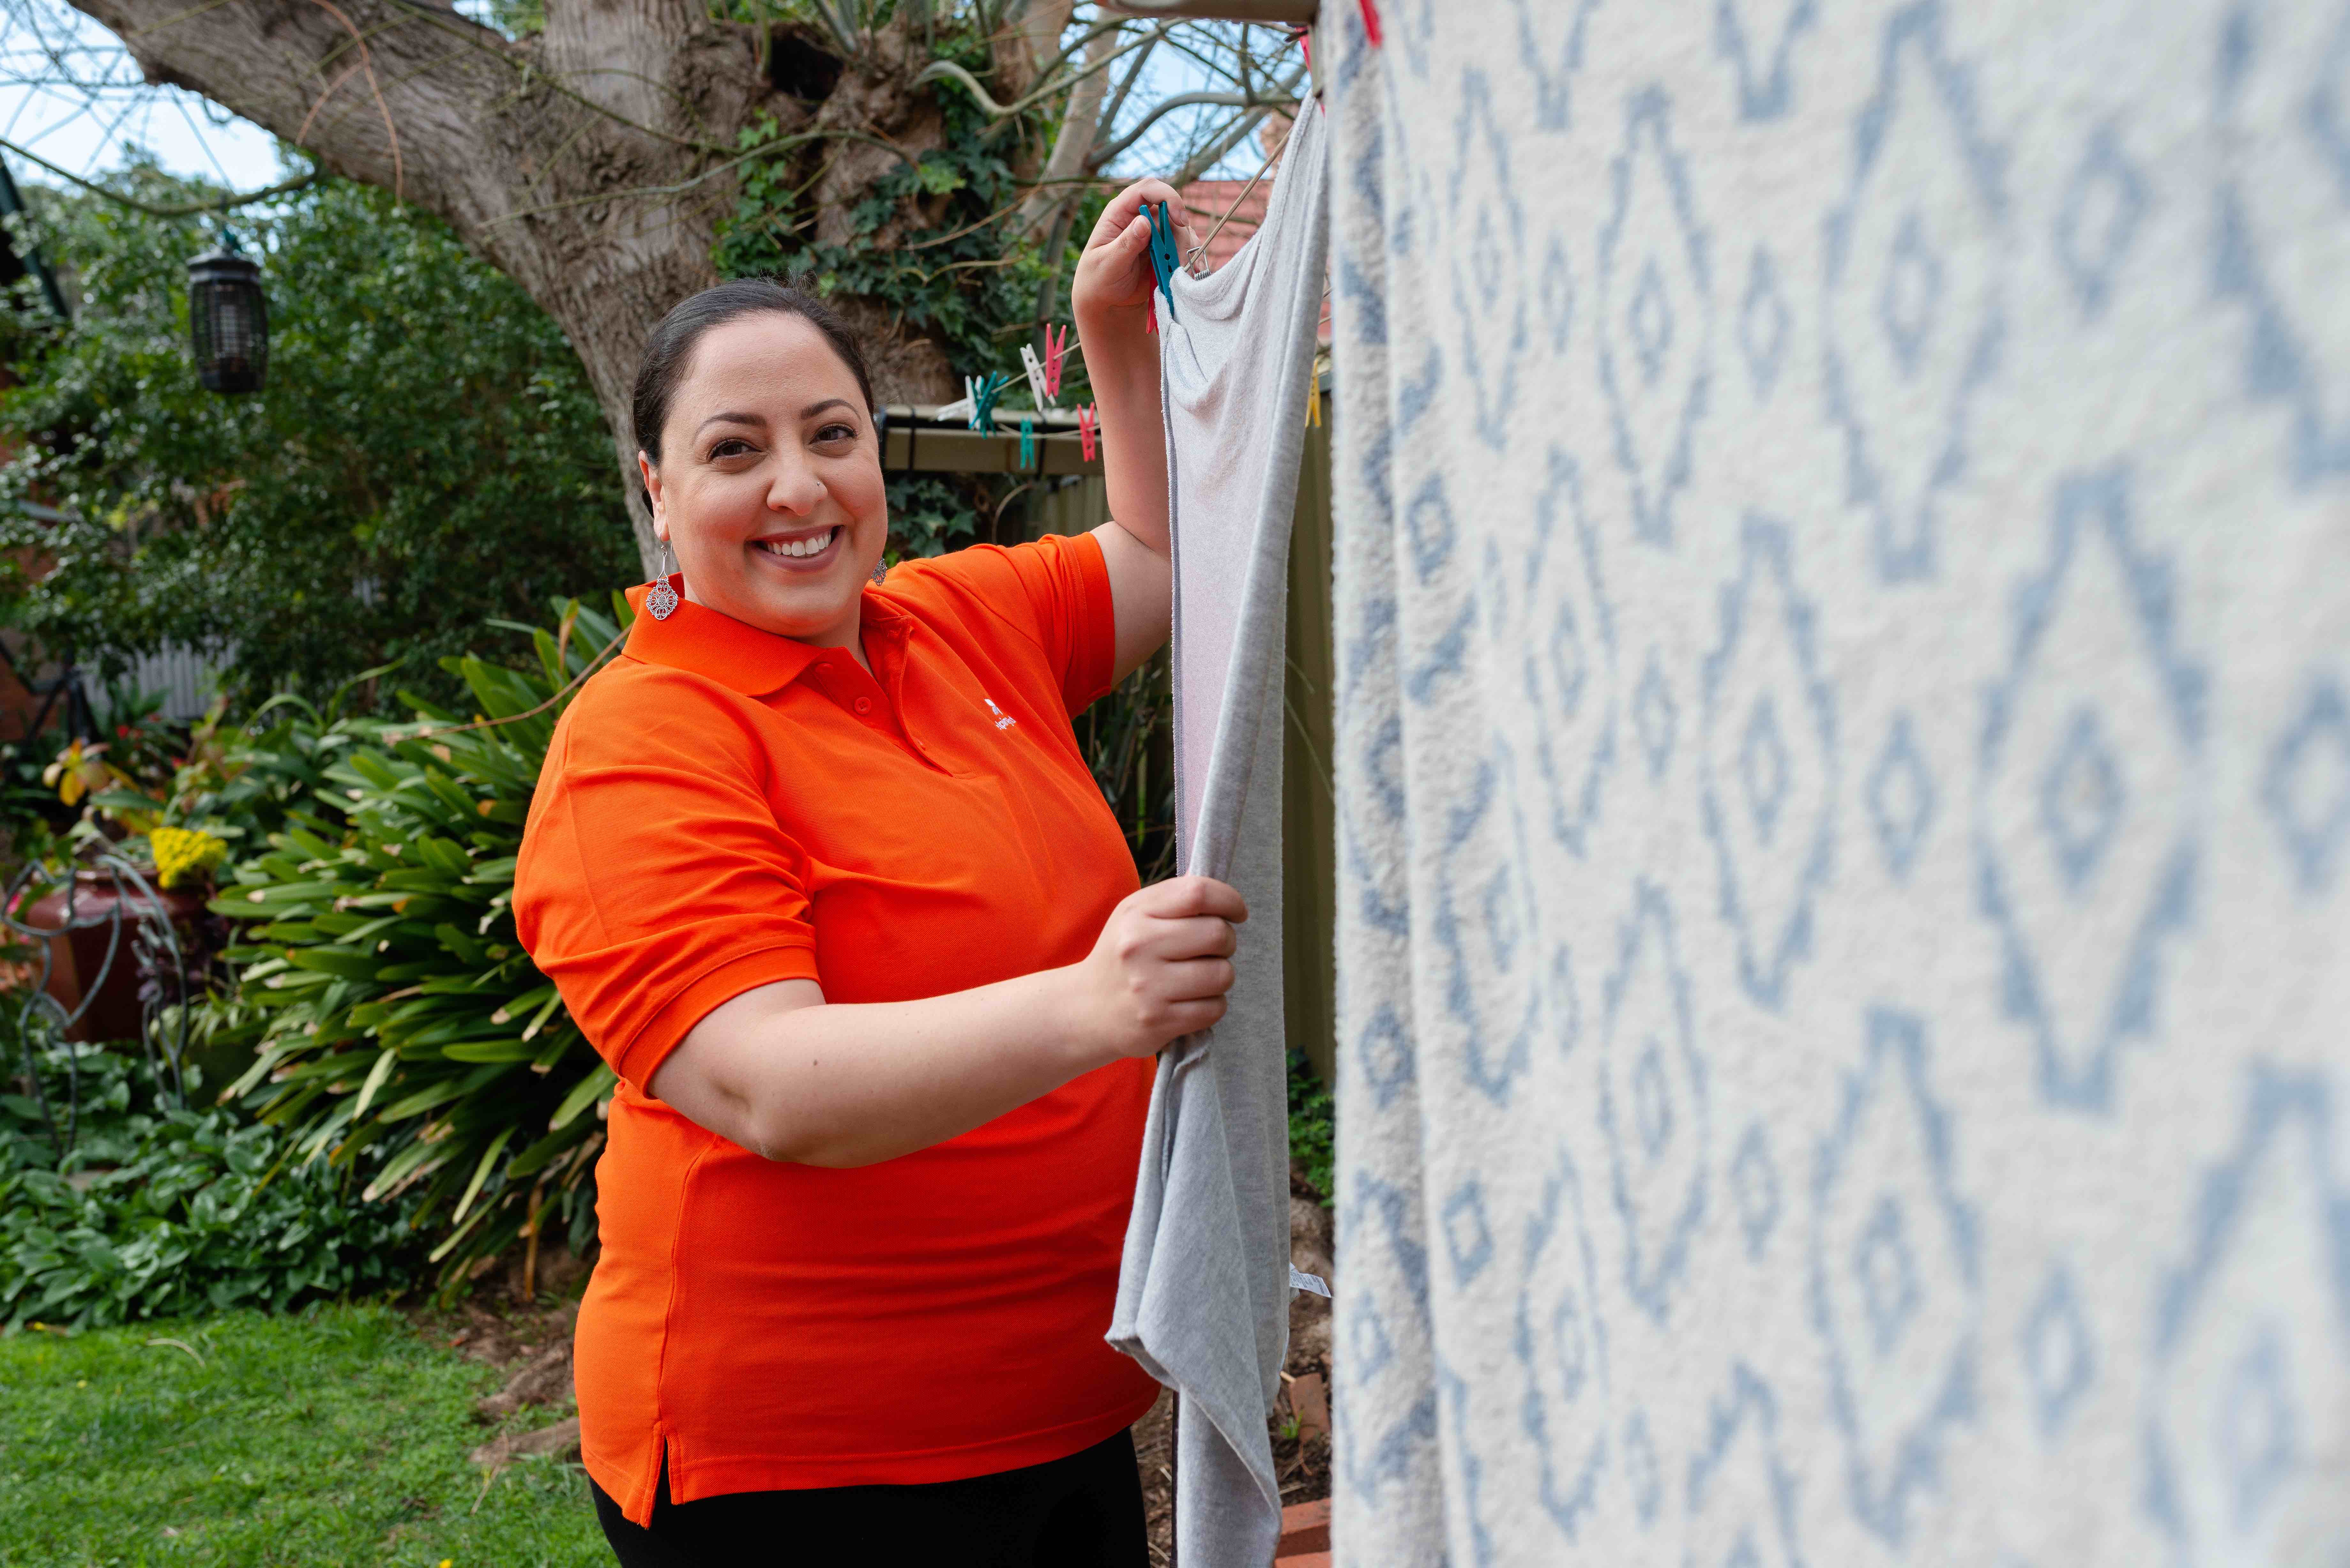 female home care worker in bright orange shirt hangs a patterned towel on the clothes line.